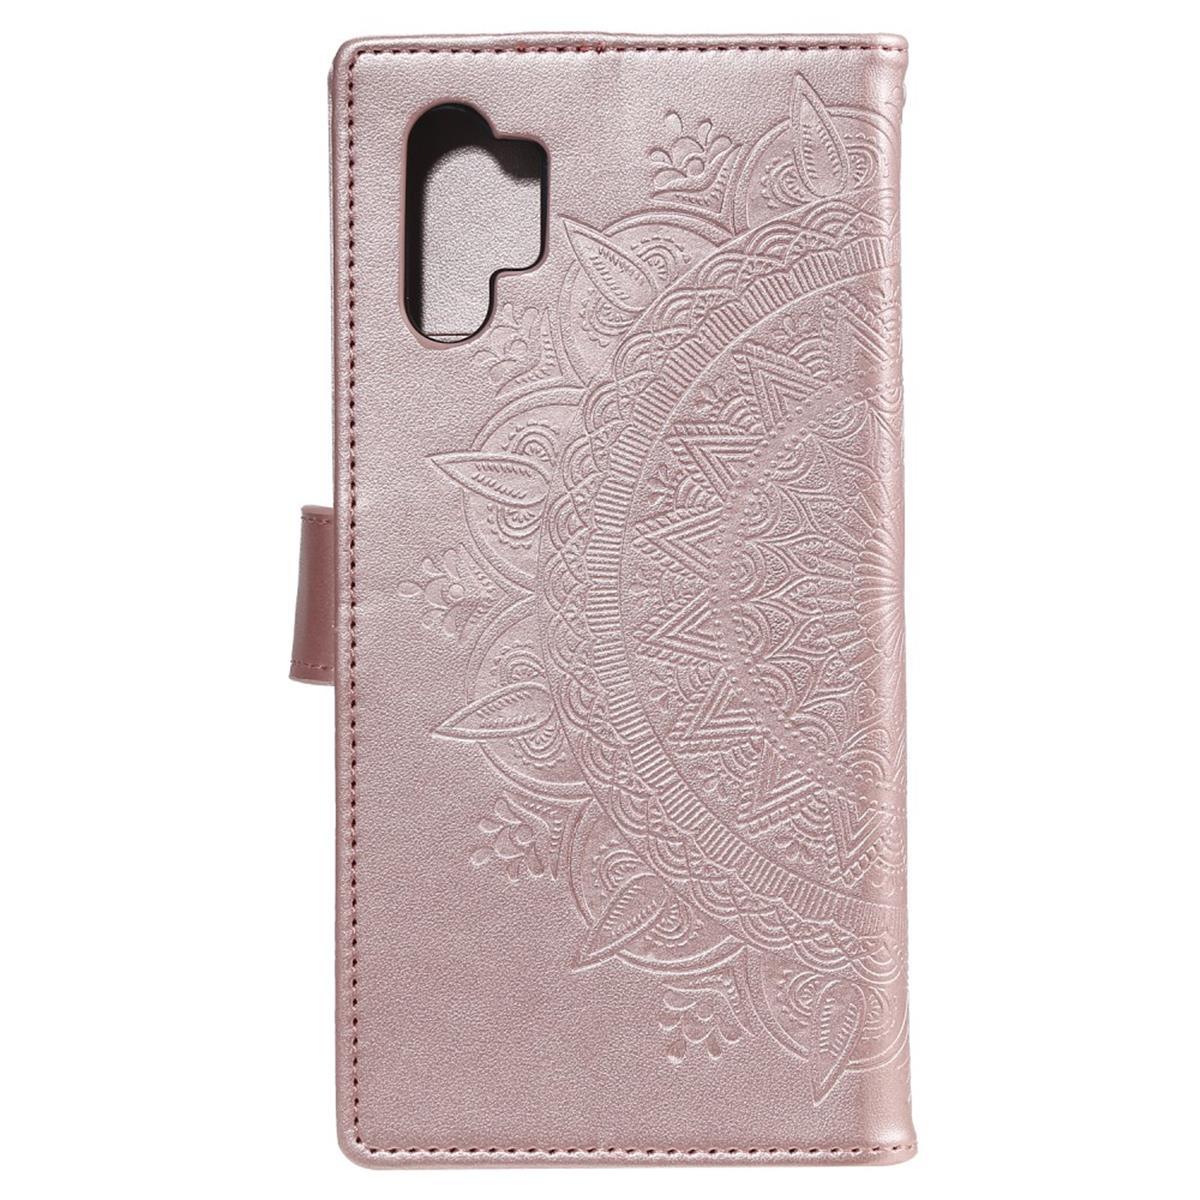 COVERKINGZ Klapphülle mit Mandala Roségold A32 Bookcover, 4G, Muster, Samsung, Galaxy